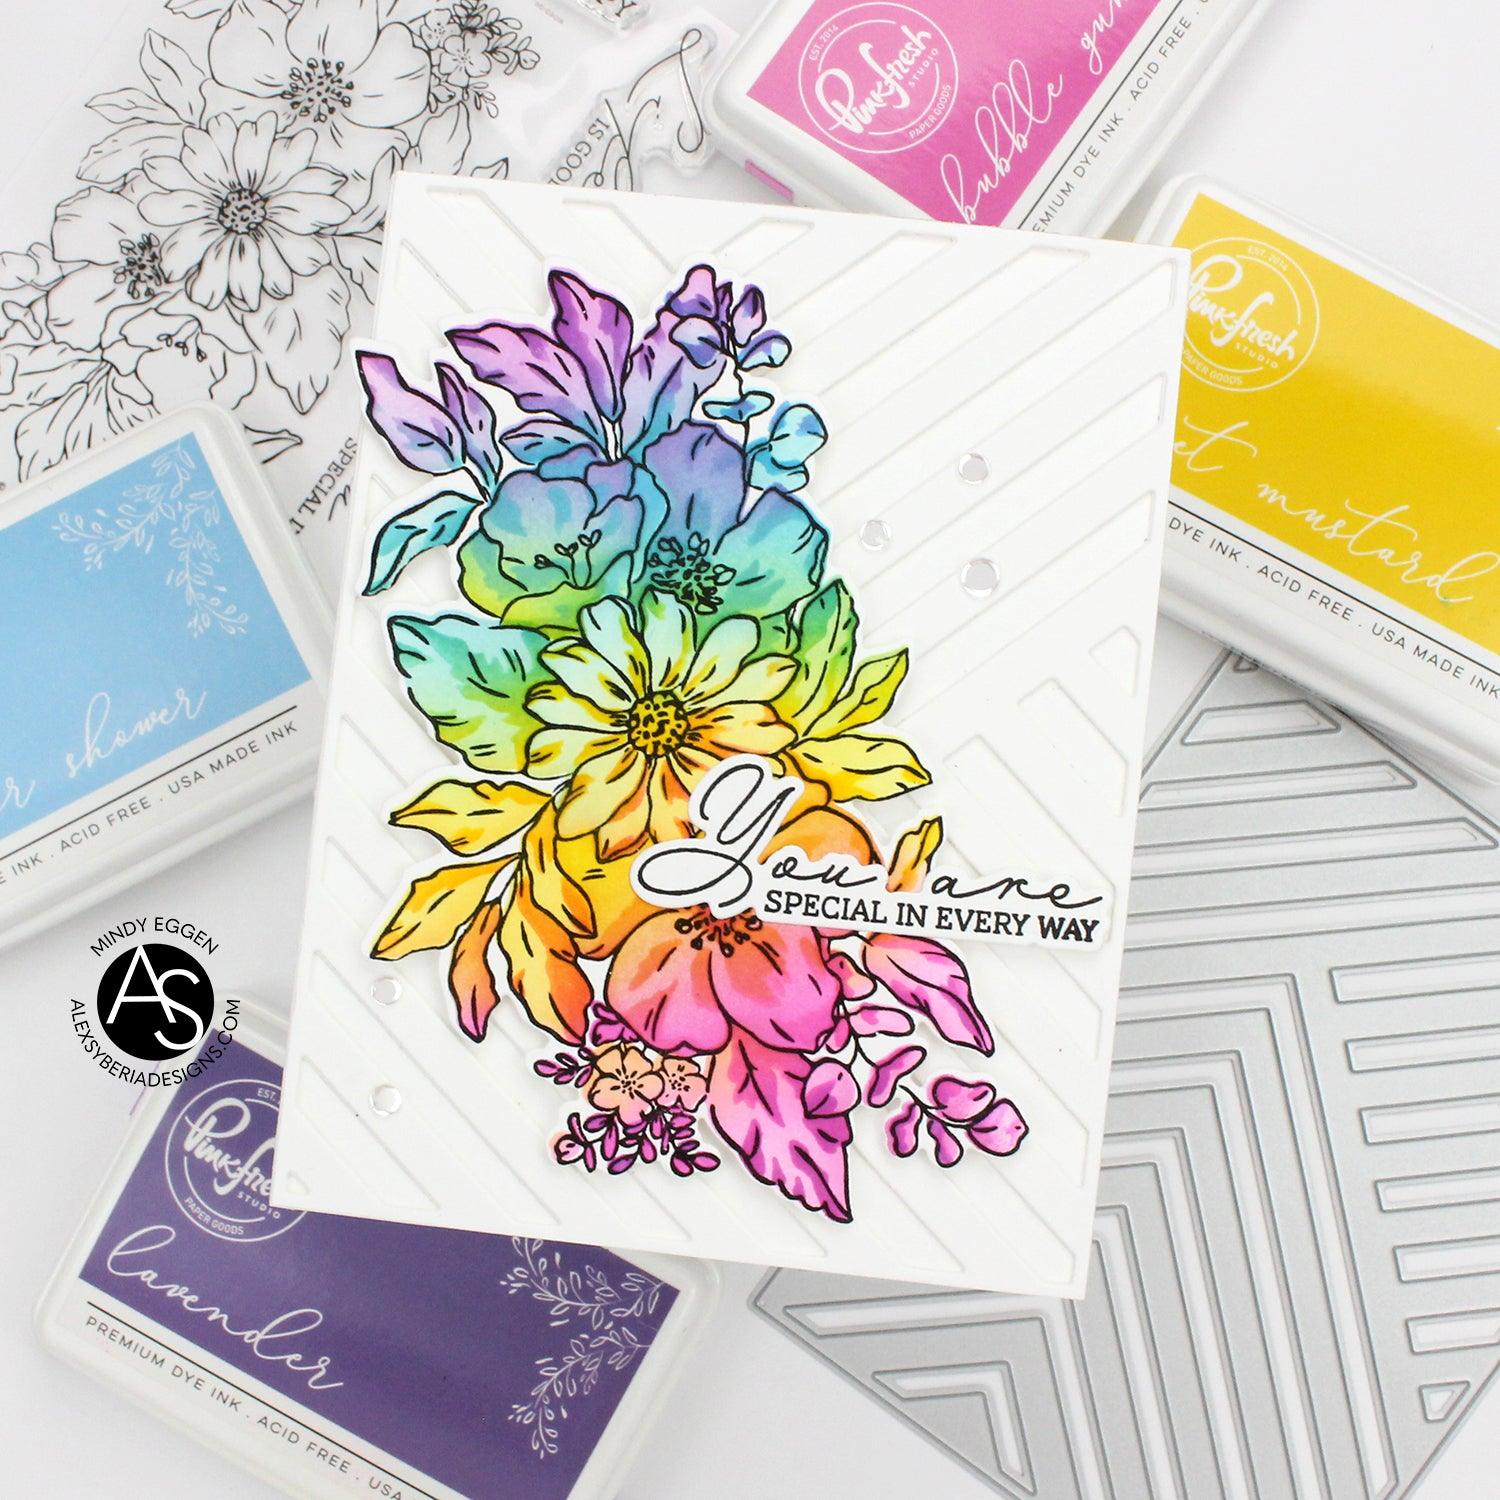 modern-stripes-die-cover-a2-alex-syberia-designs-cardmaking-diecutting-handmadecards-ideas-tutorials-papercrafting-brands-diycards-cutting-machine-layering-stamps-flowers-floral-cardmakers-rainbow-bouquet-layering-stencils